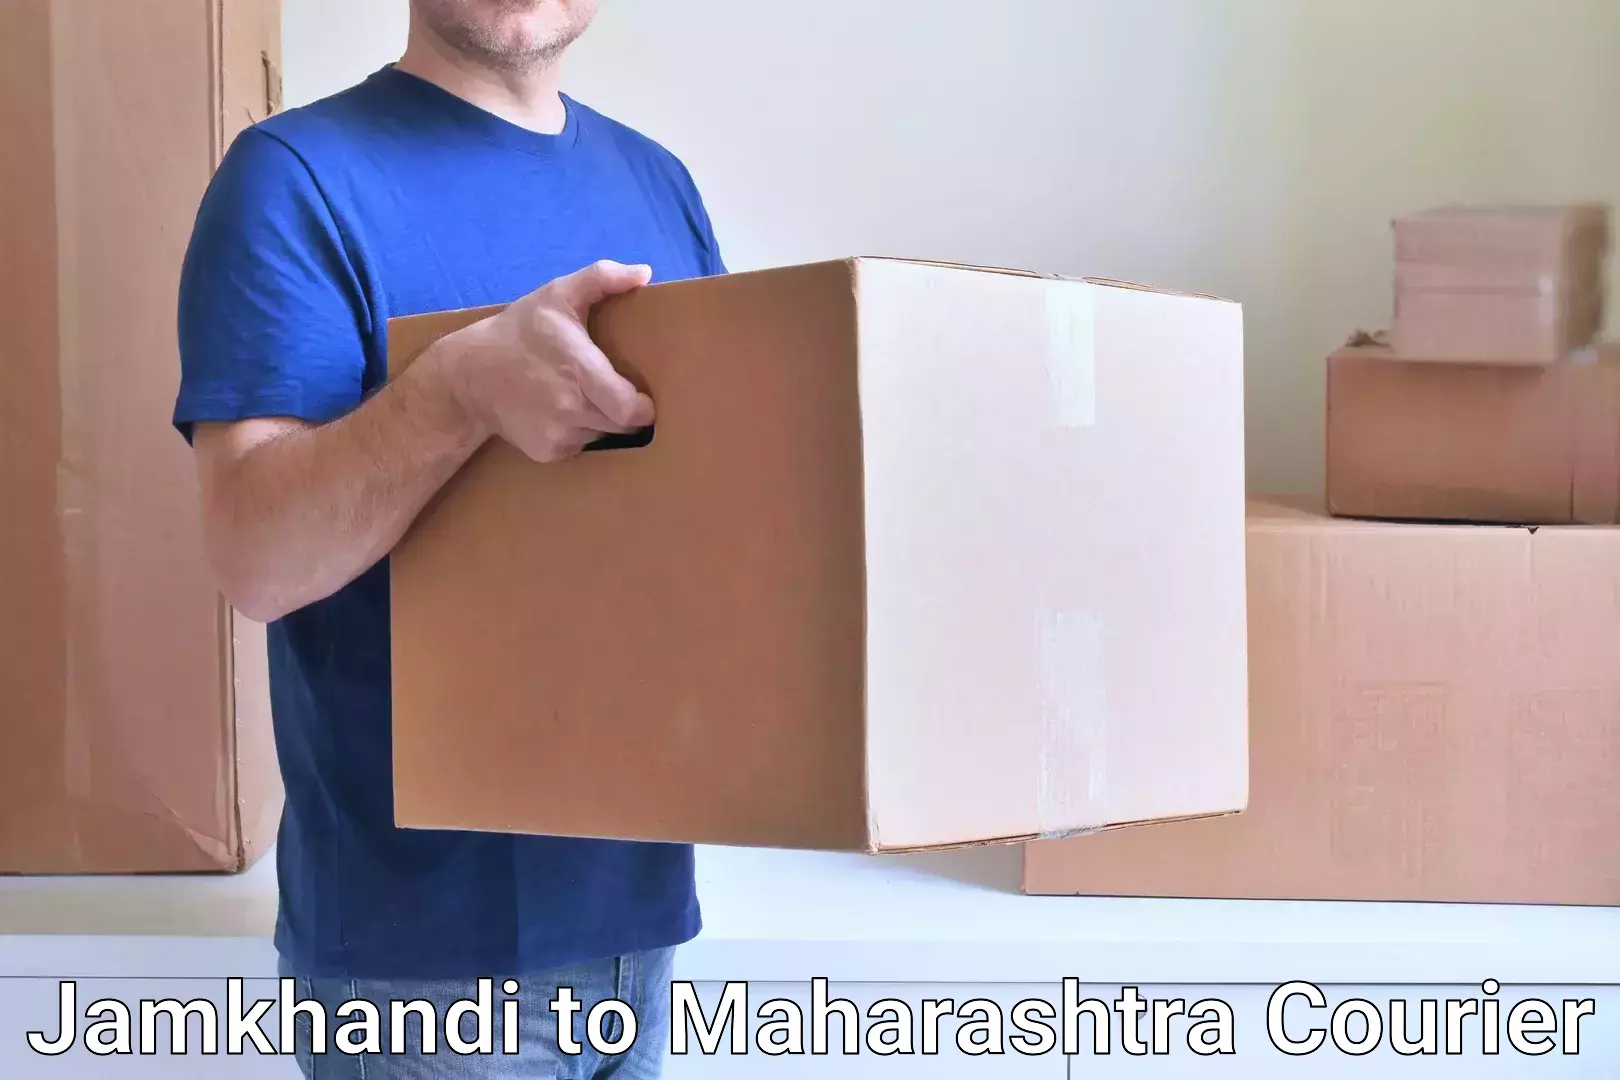 State-of-the-art courier technology in Jamkhandi to Maharashtra